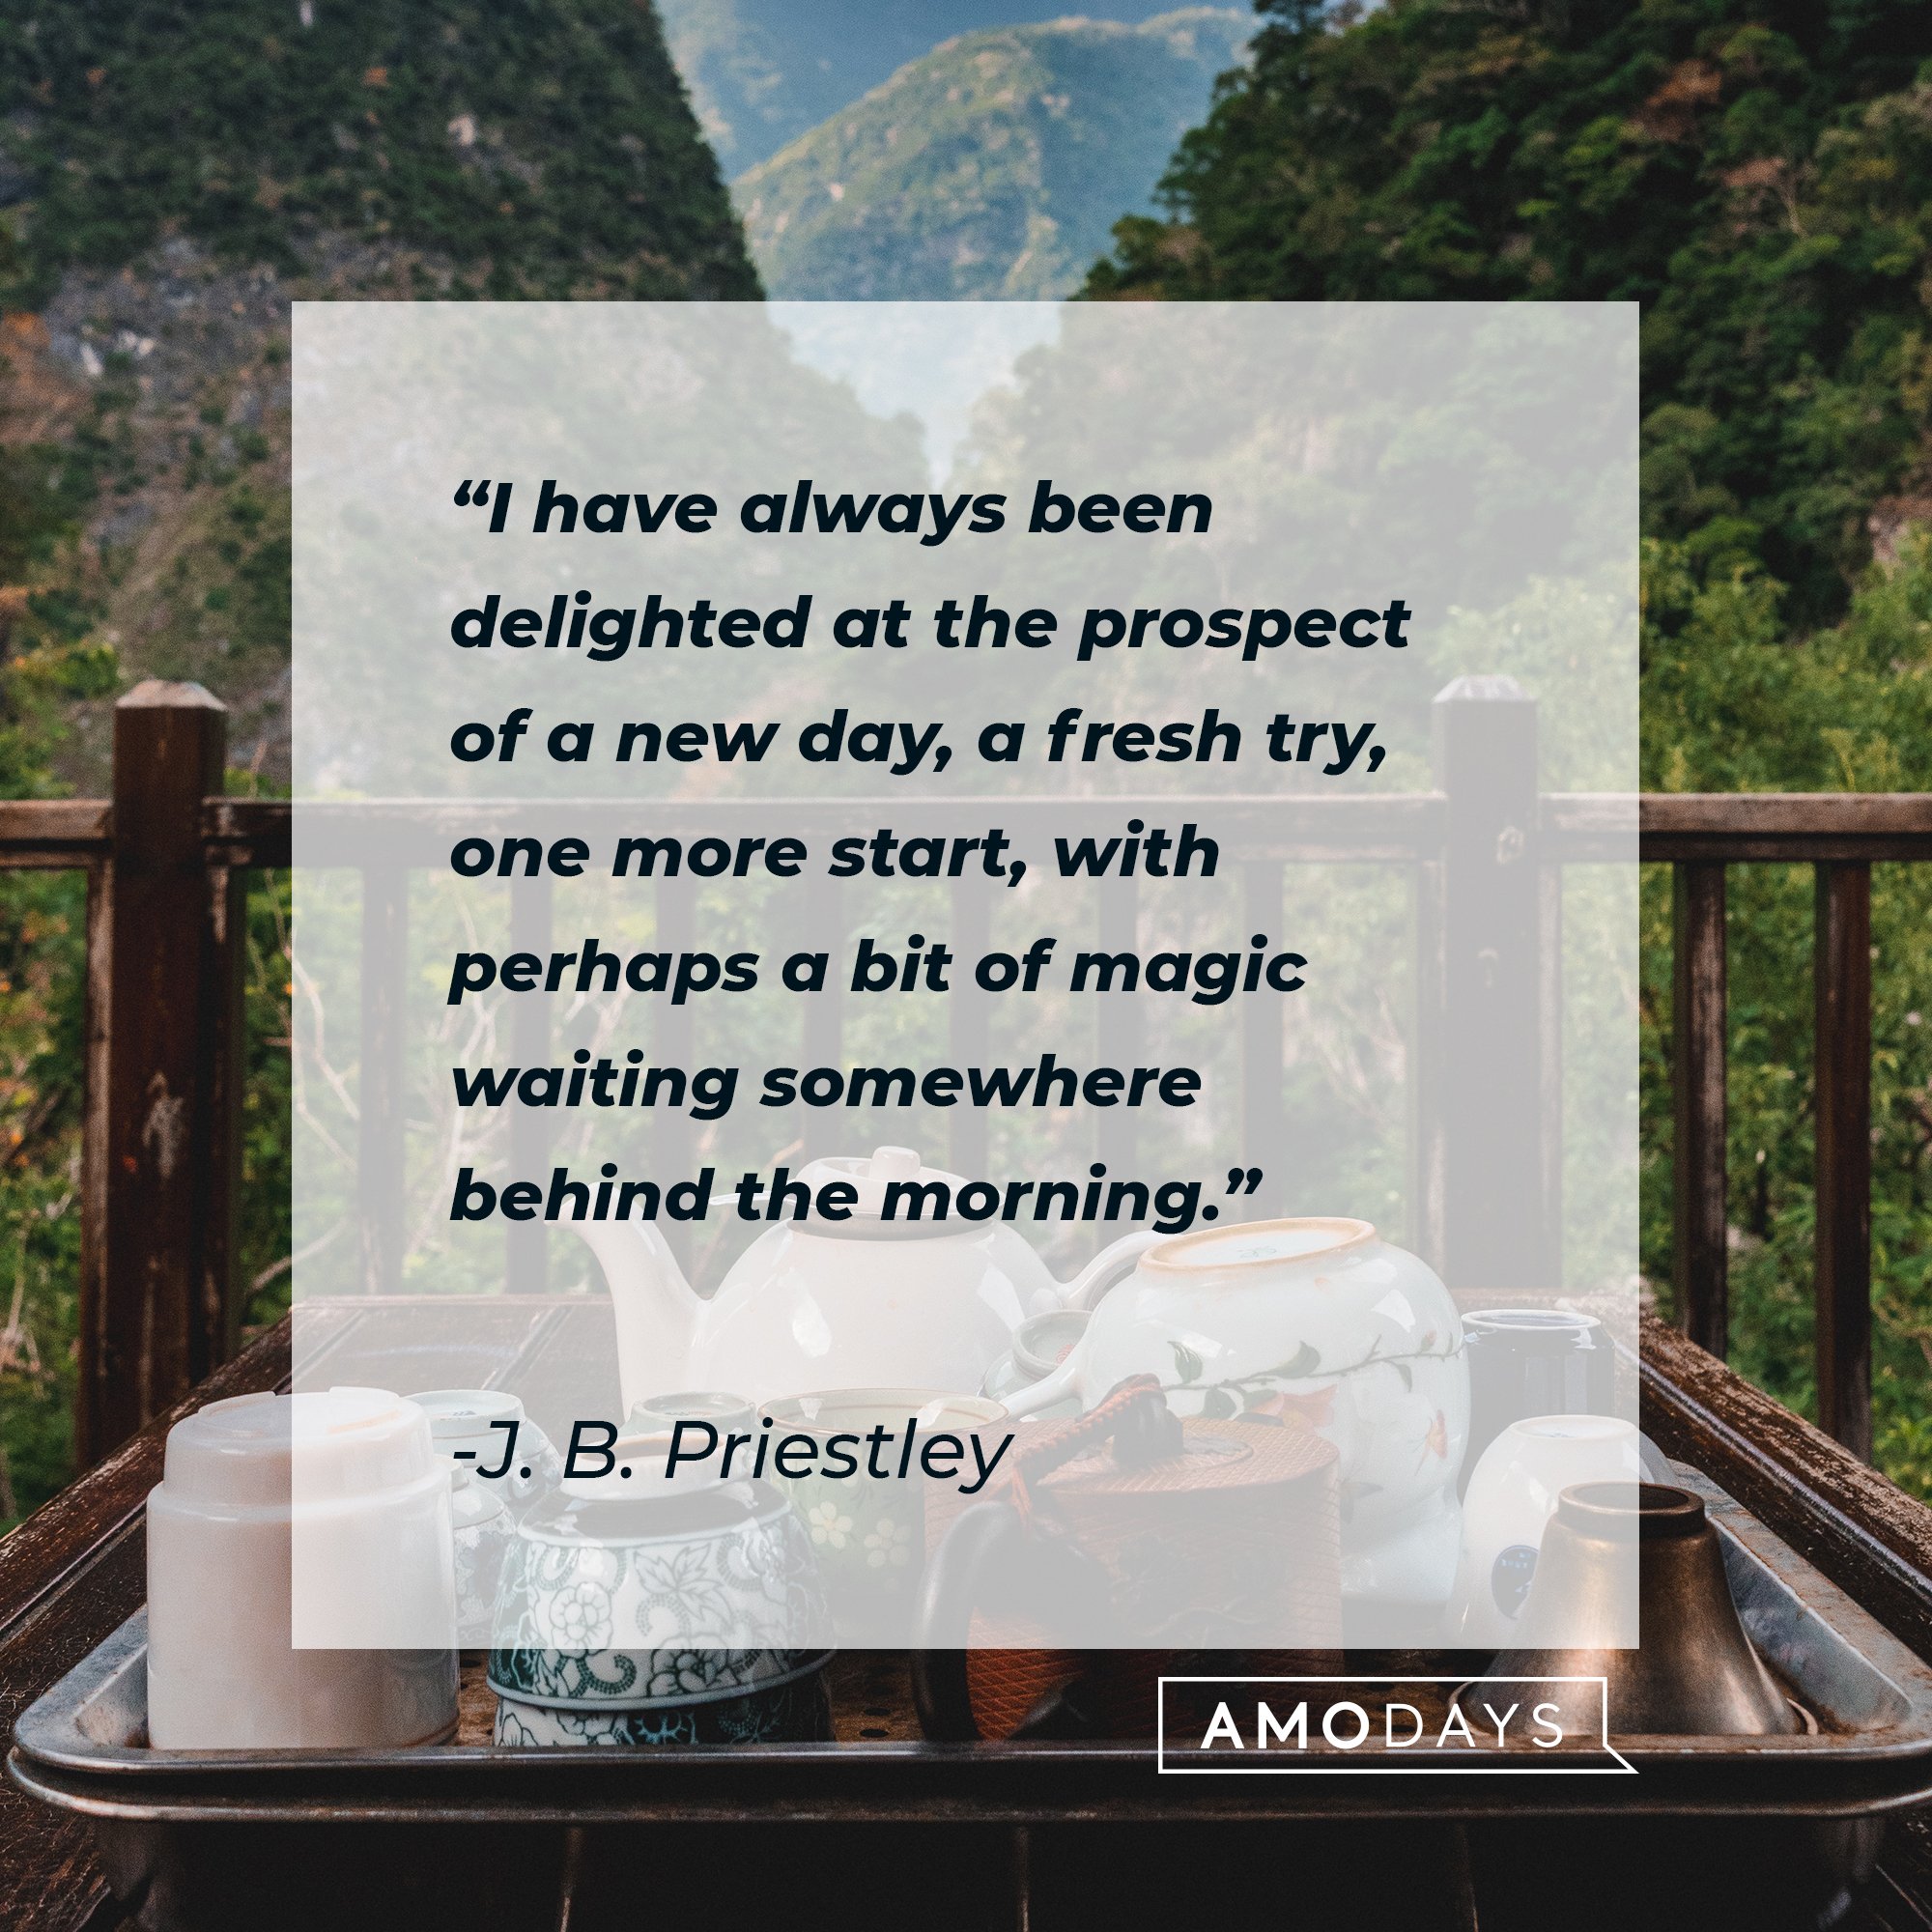 J. B. Priestley's quote: "I have always been delighted at the prospect of a new day, a fresh try, one more start, with perhaps a bit of magic waiting somewhere behind the morning." | Image: AmoDays